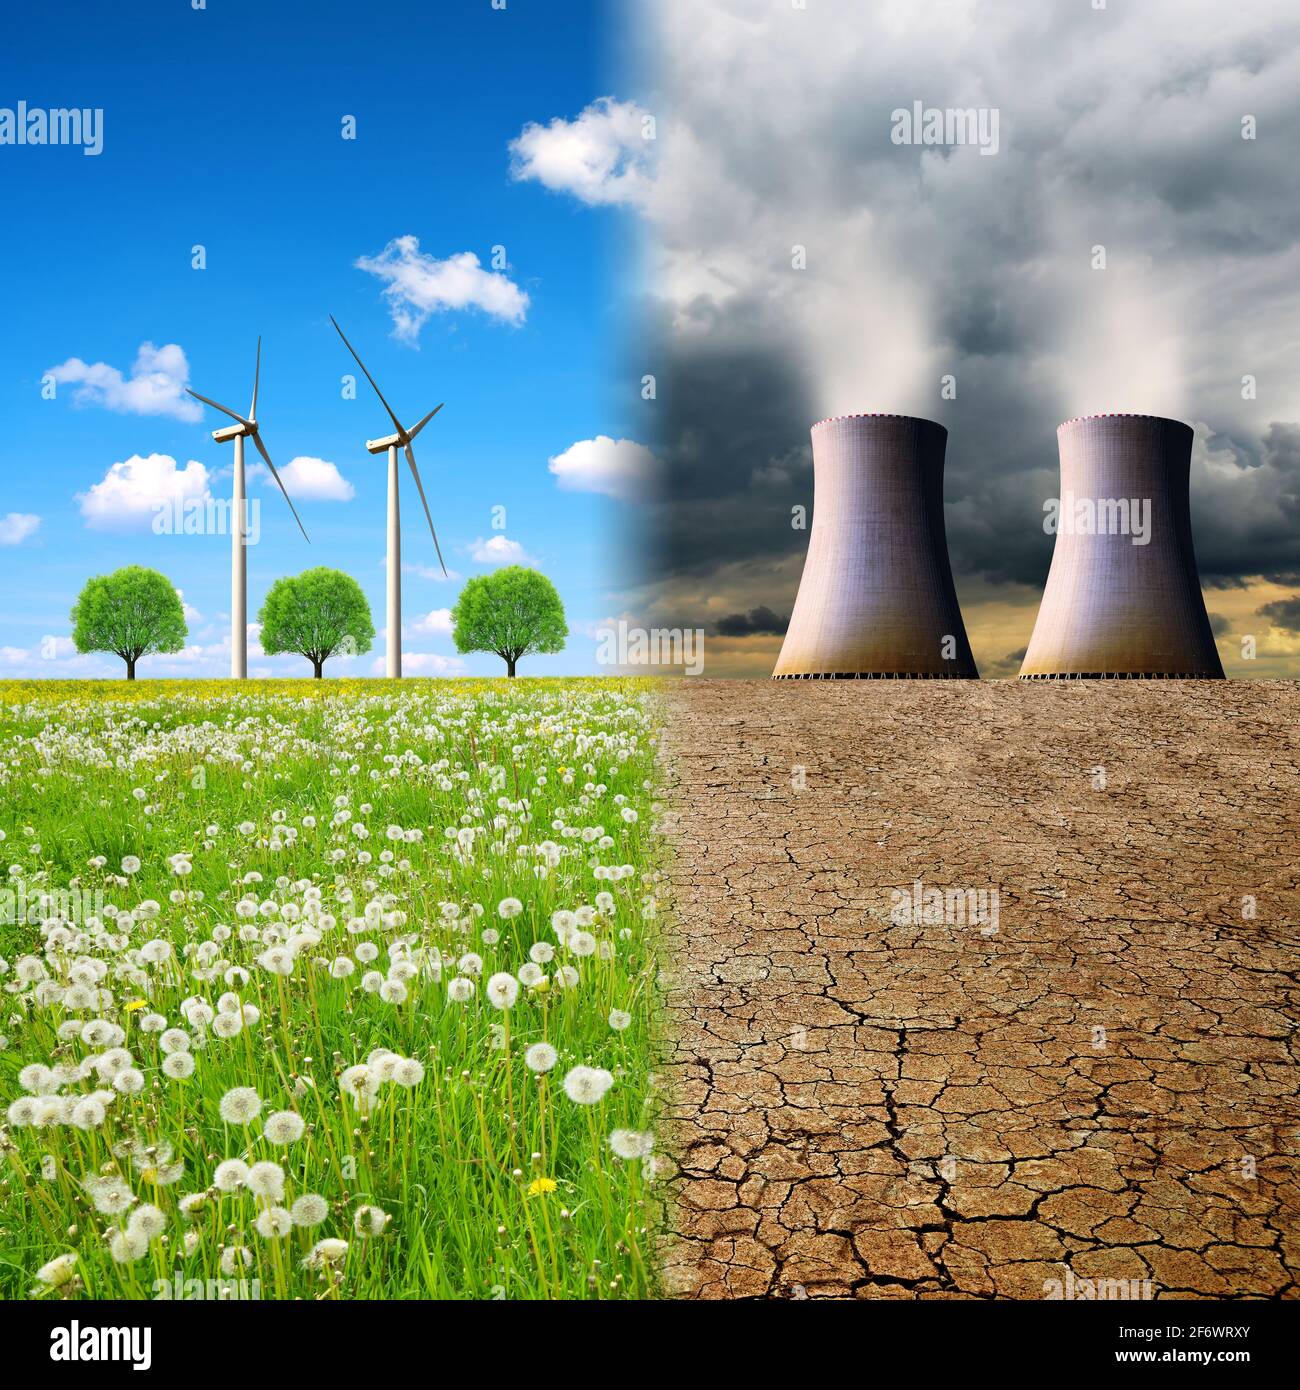 Cooling towers of a nuclear power plant in a devastated landscape and wind turbines on a meadow. Concept of clean and polluting energy generation. Stock Photo